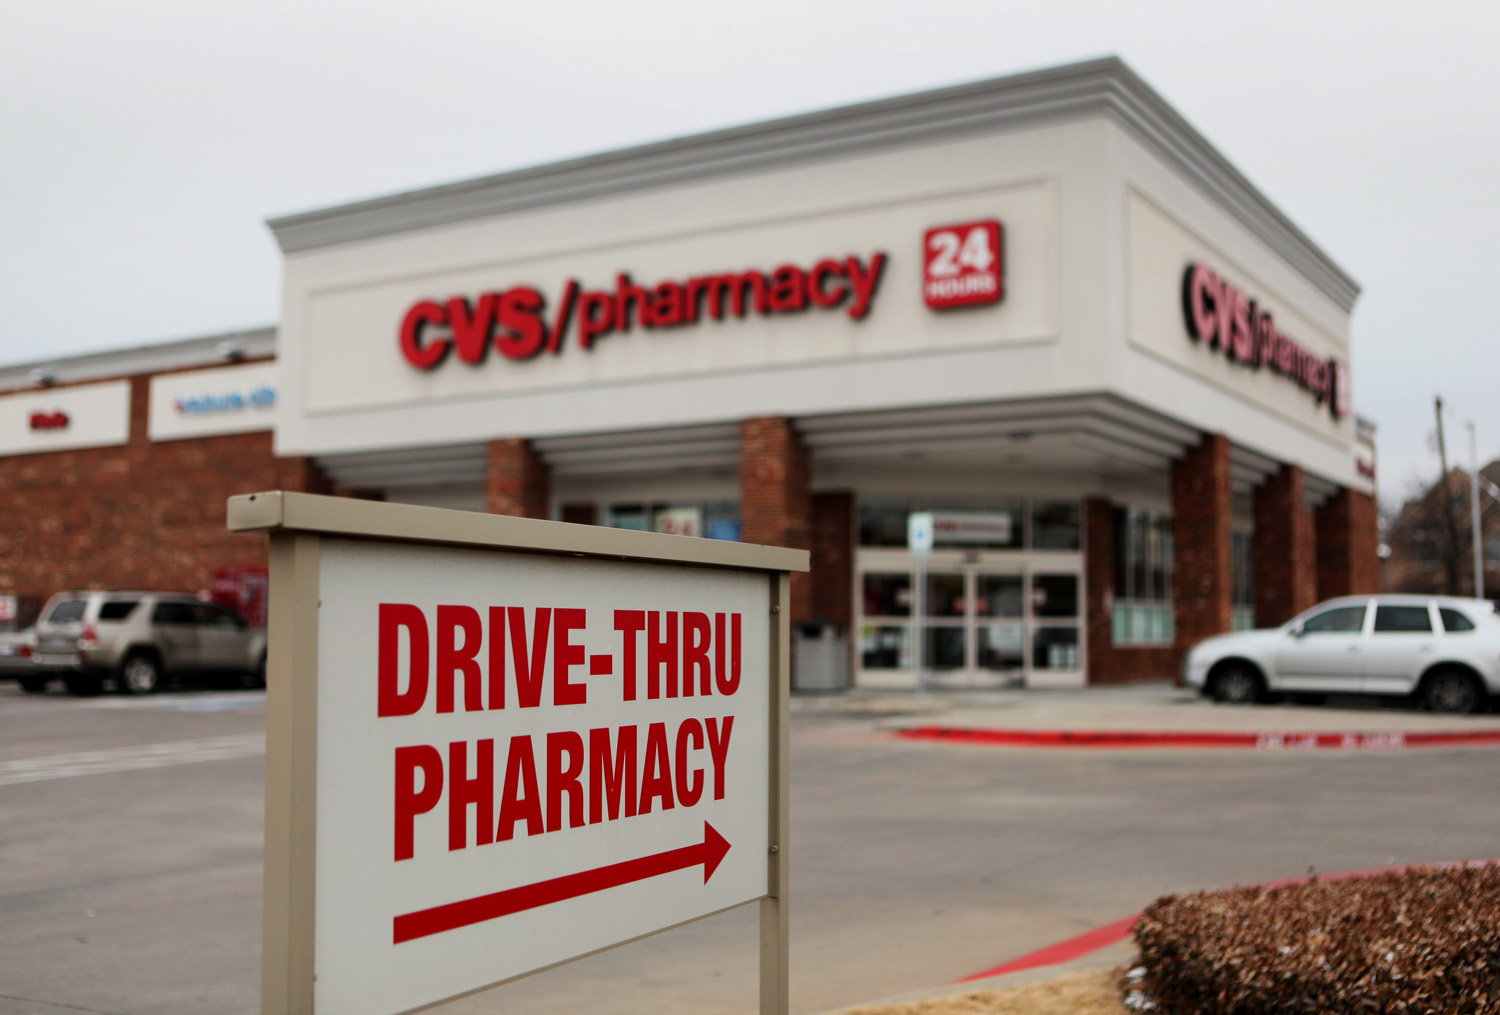 Stocks rose for CVS less than a week after announcing they would not be selling tobacco products anymore. (Ben Torres&mdash;Bloomberg/Getty Images)